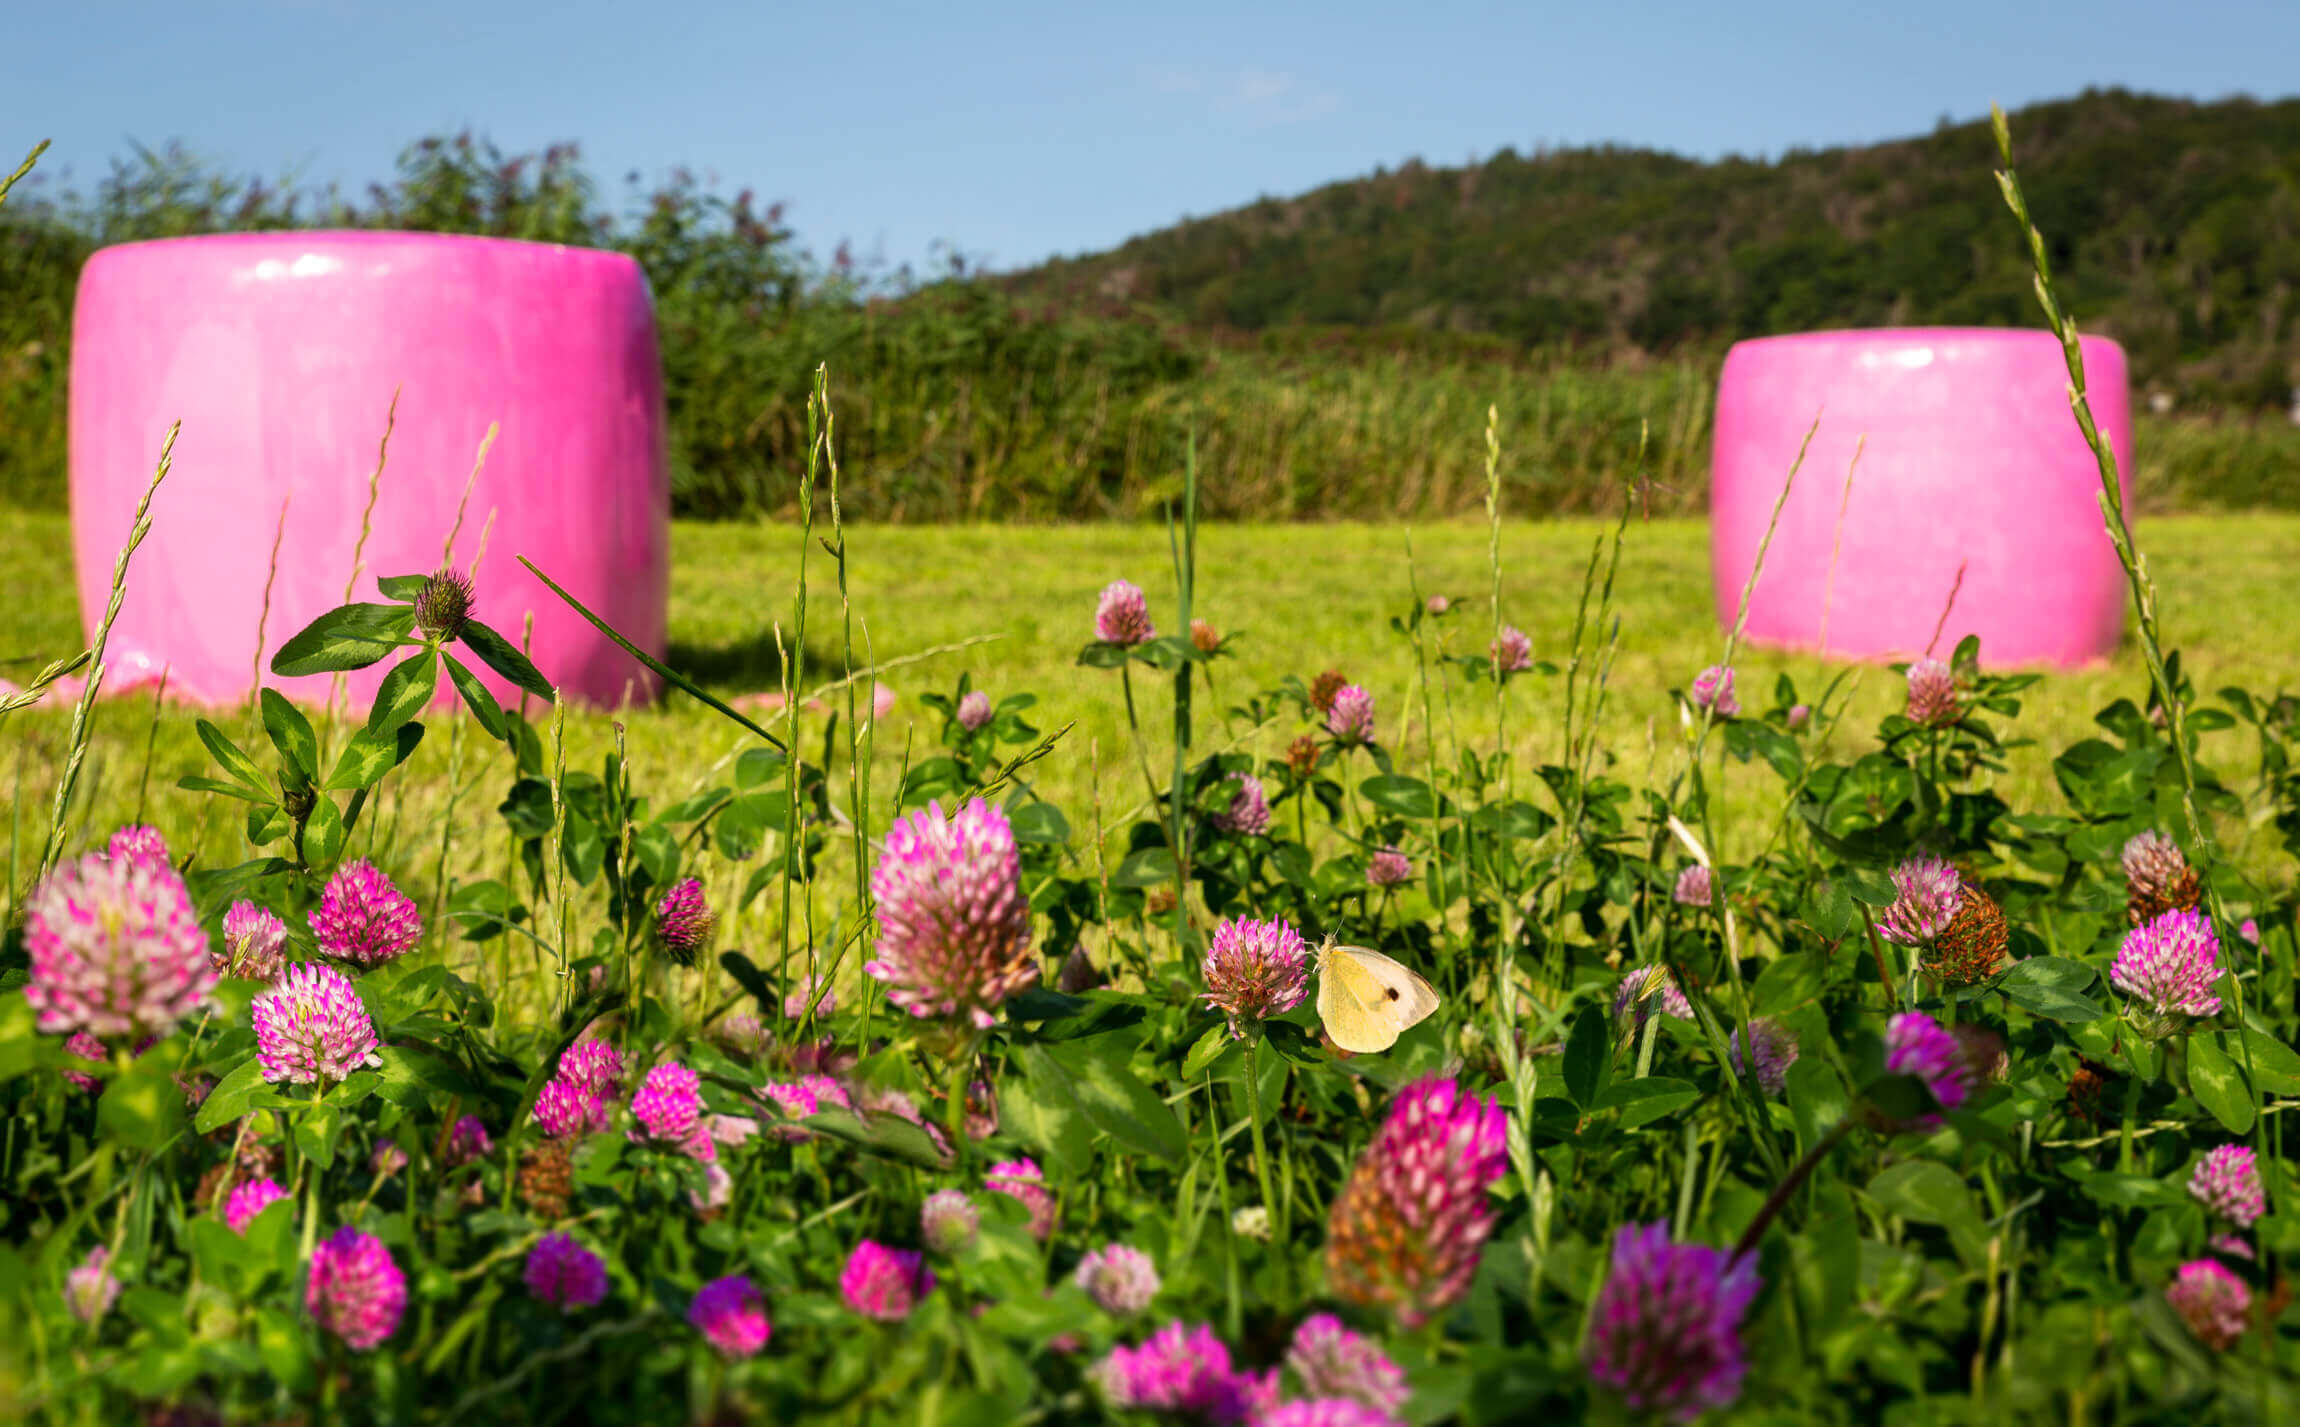 Hay bales are stored on the field in pink wrapping stretch film